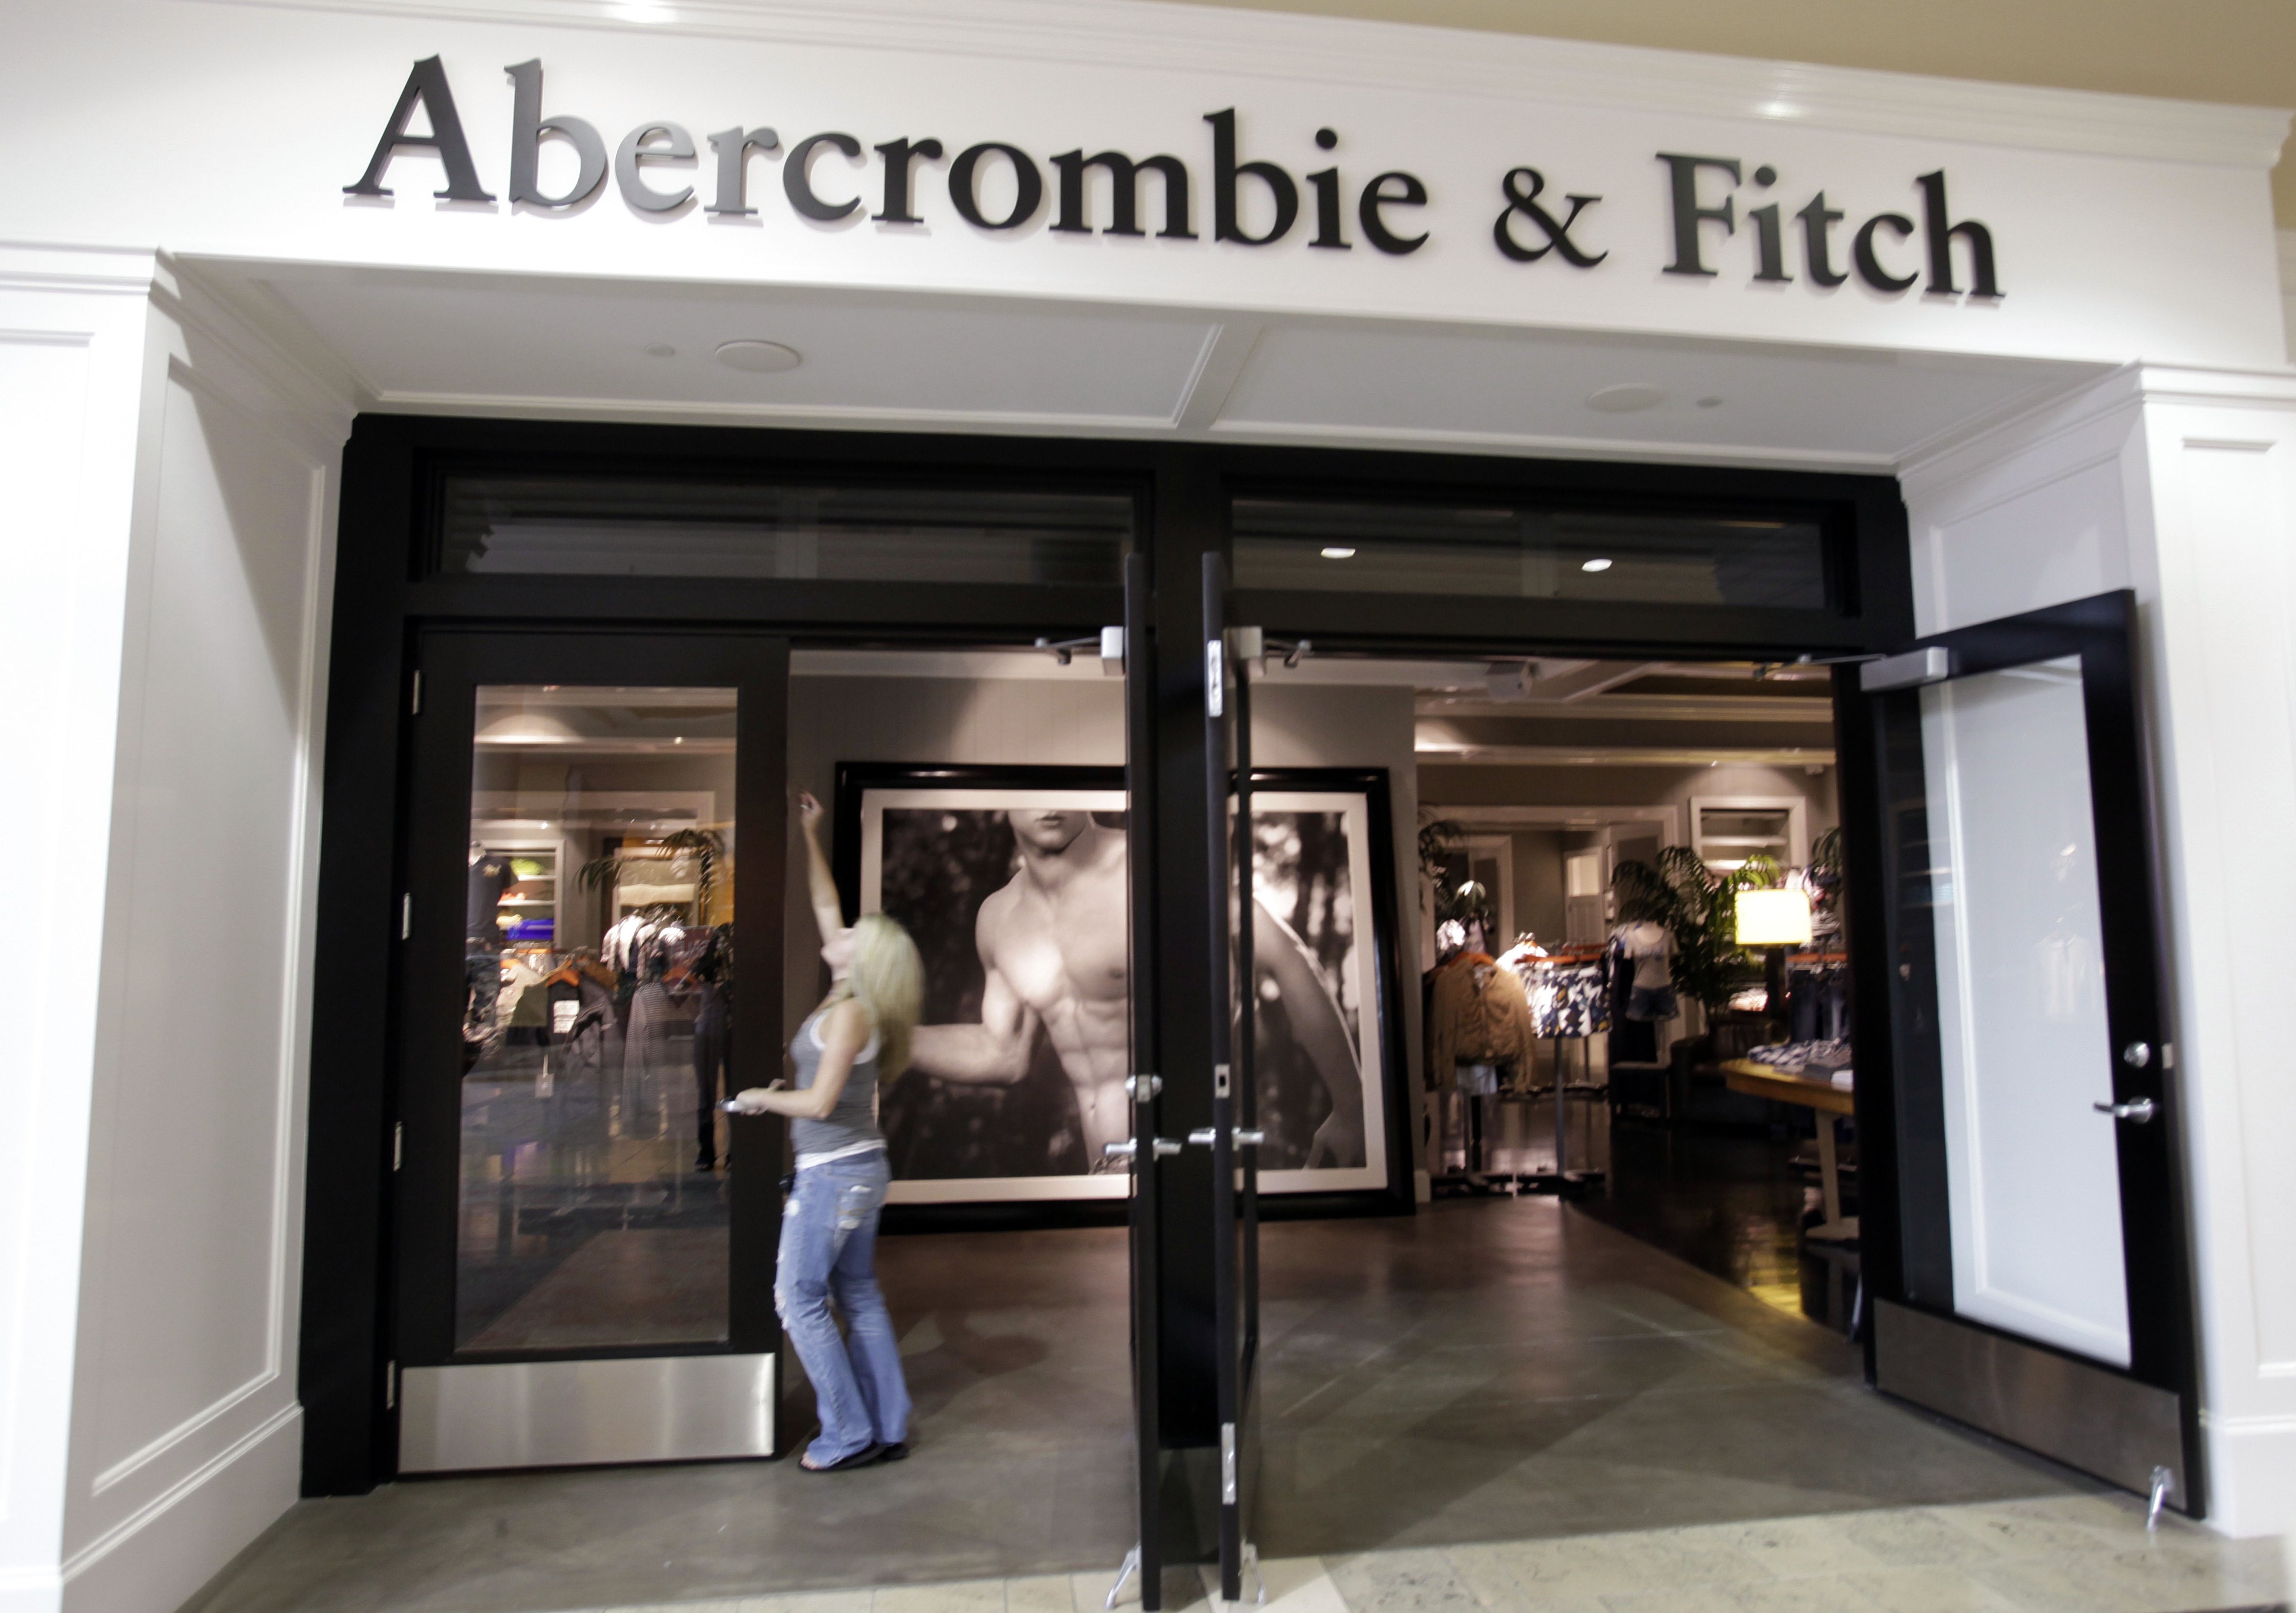 abercrombie and fitch dress code